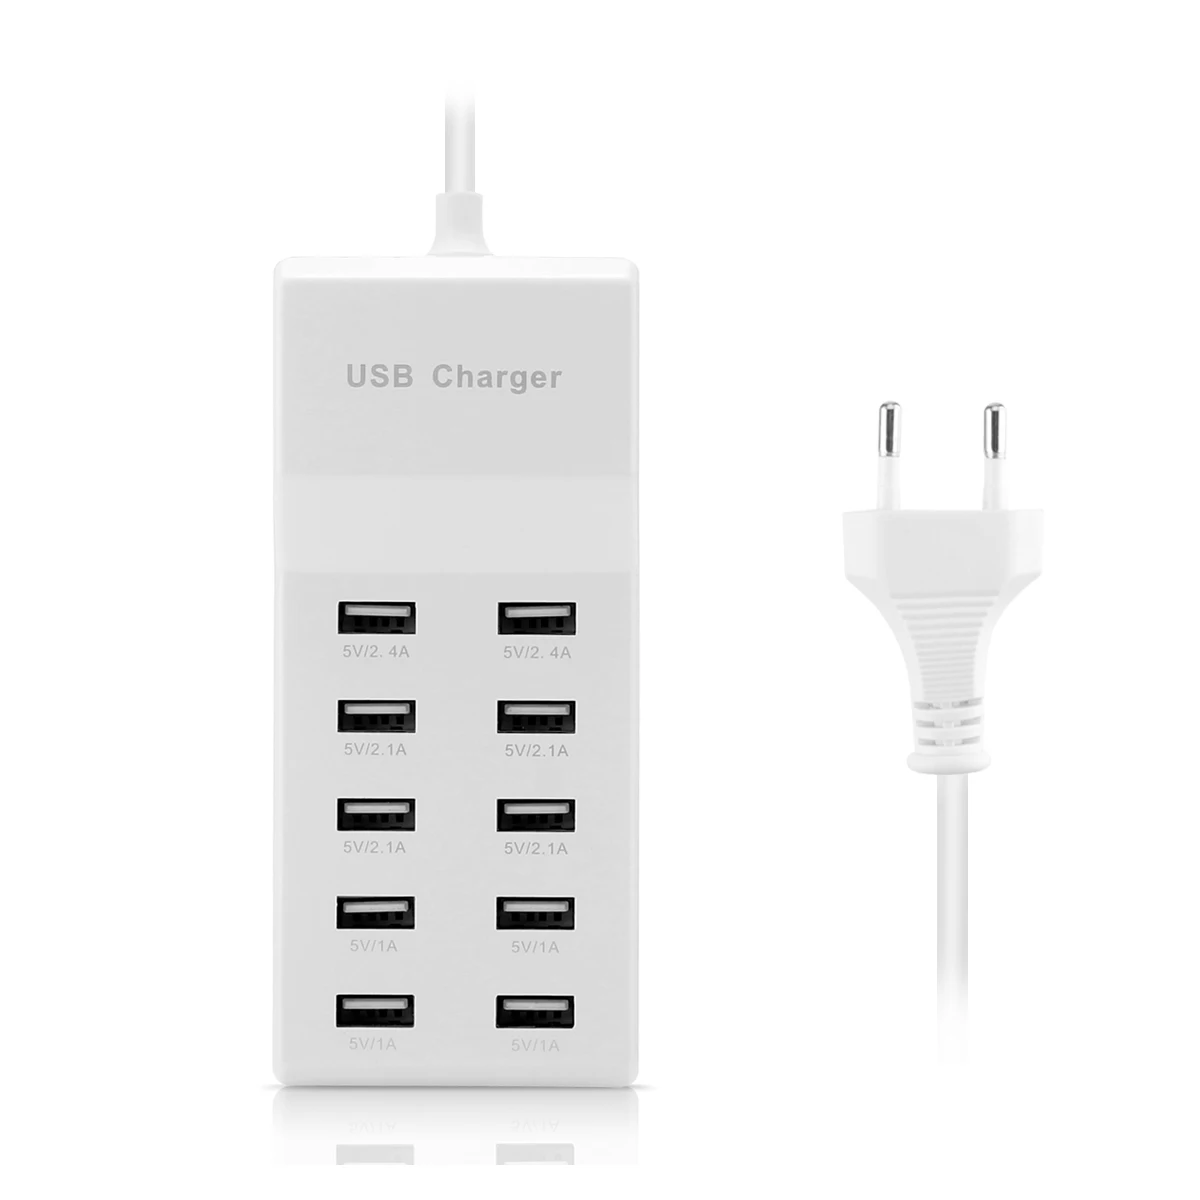 

10 USB Charger Station Splitter 60W Mobile Phone Charger HUB Smart IC Charge Universal for iPhone ipad Samsung MP3 Tablet Etc